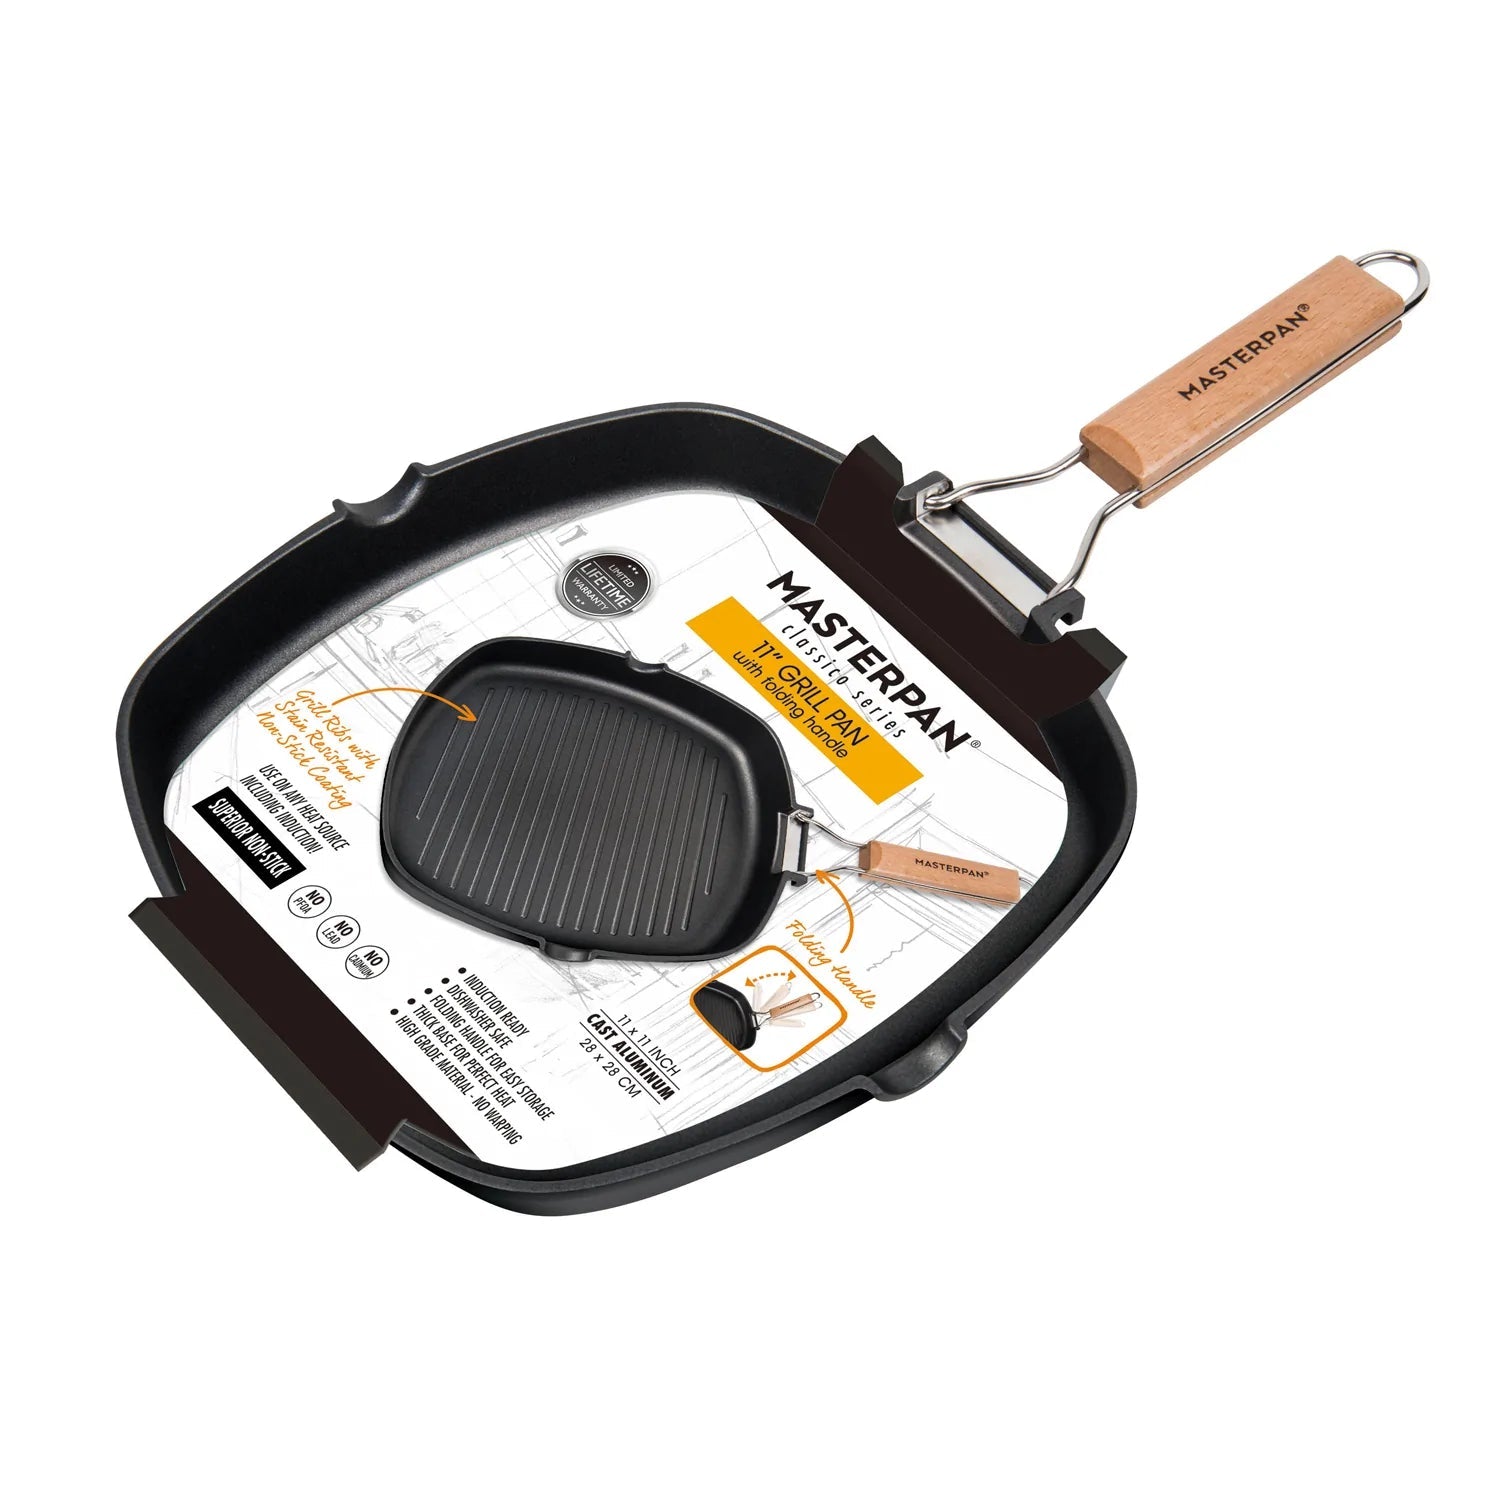 MASTERPAN Classico Series 11” Grill Pan Non-stick Cast Aluminum With Folding Handle